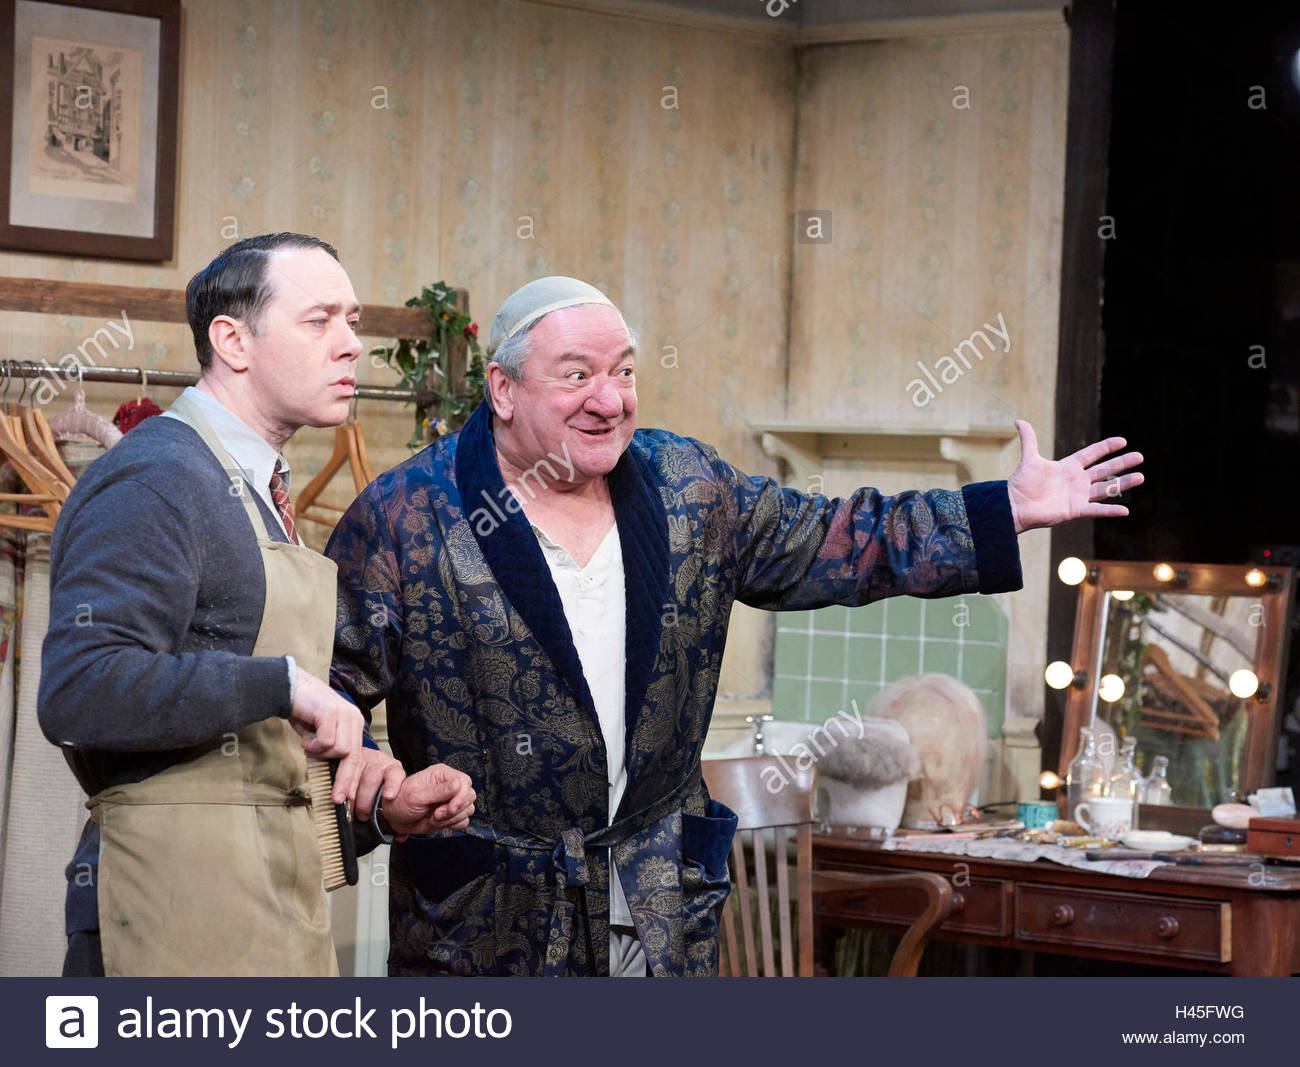 The Dresser By Ronald Harwood Directed By Sean Foley With Reece